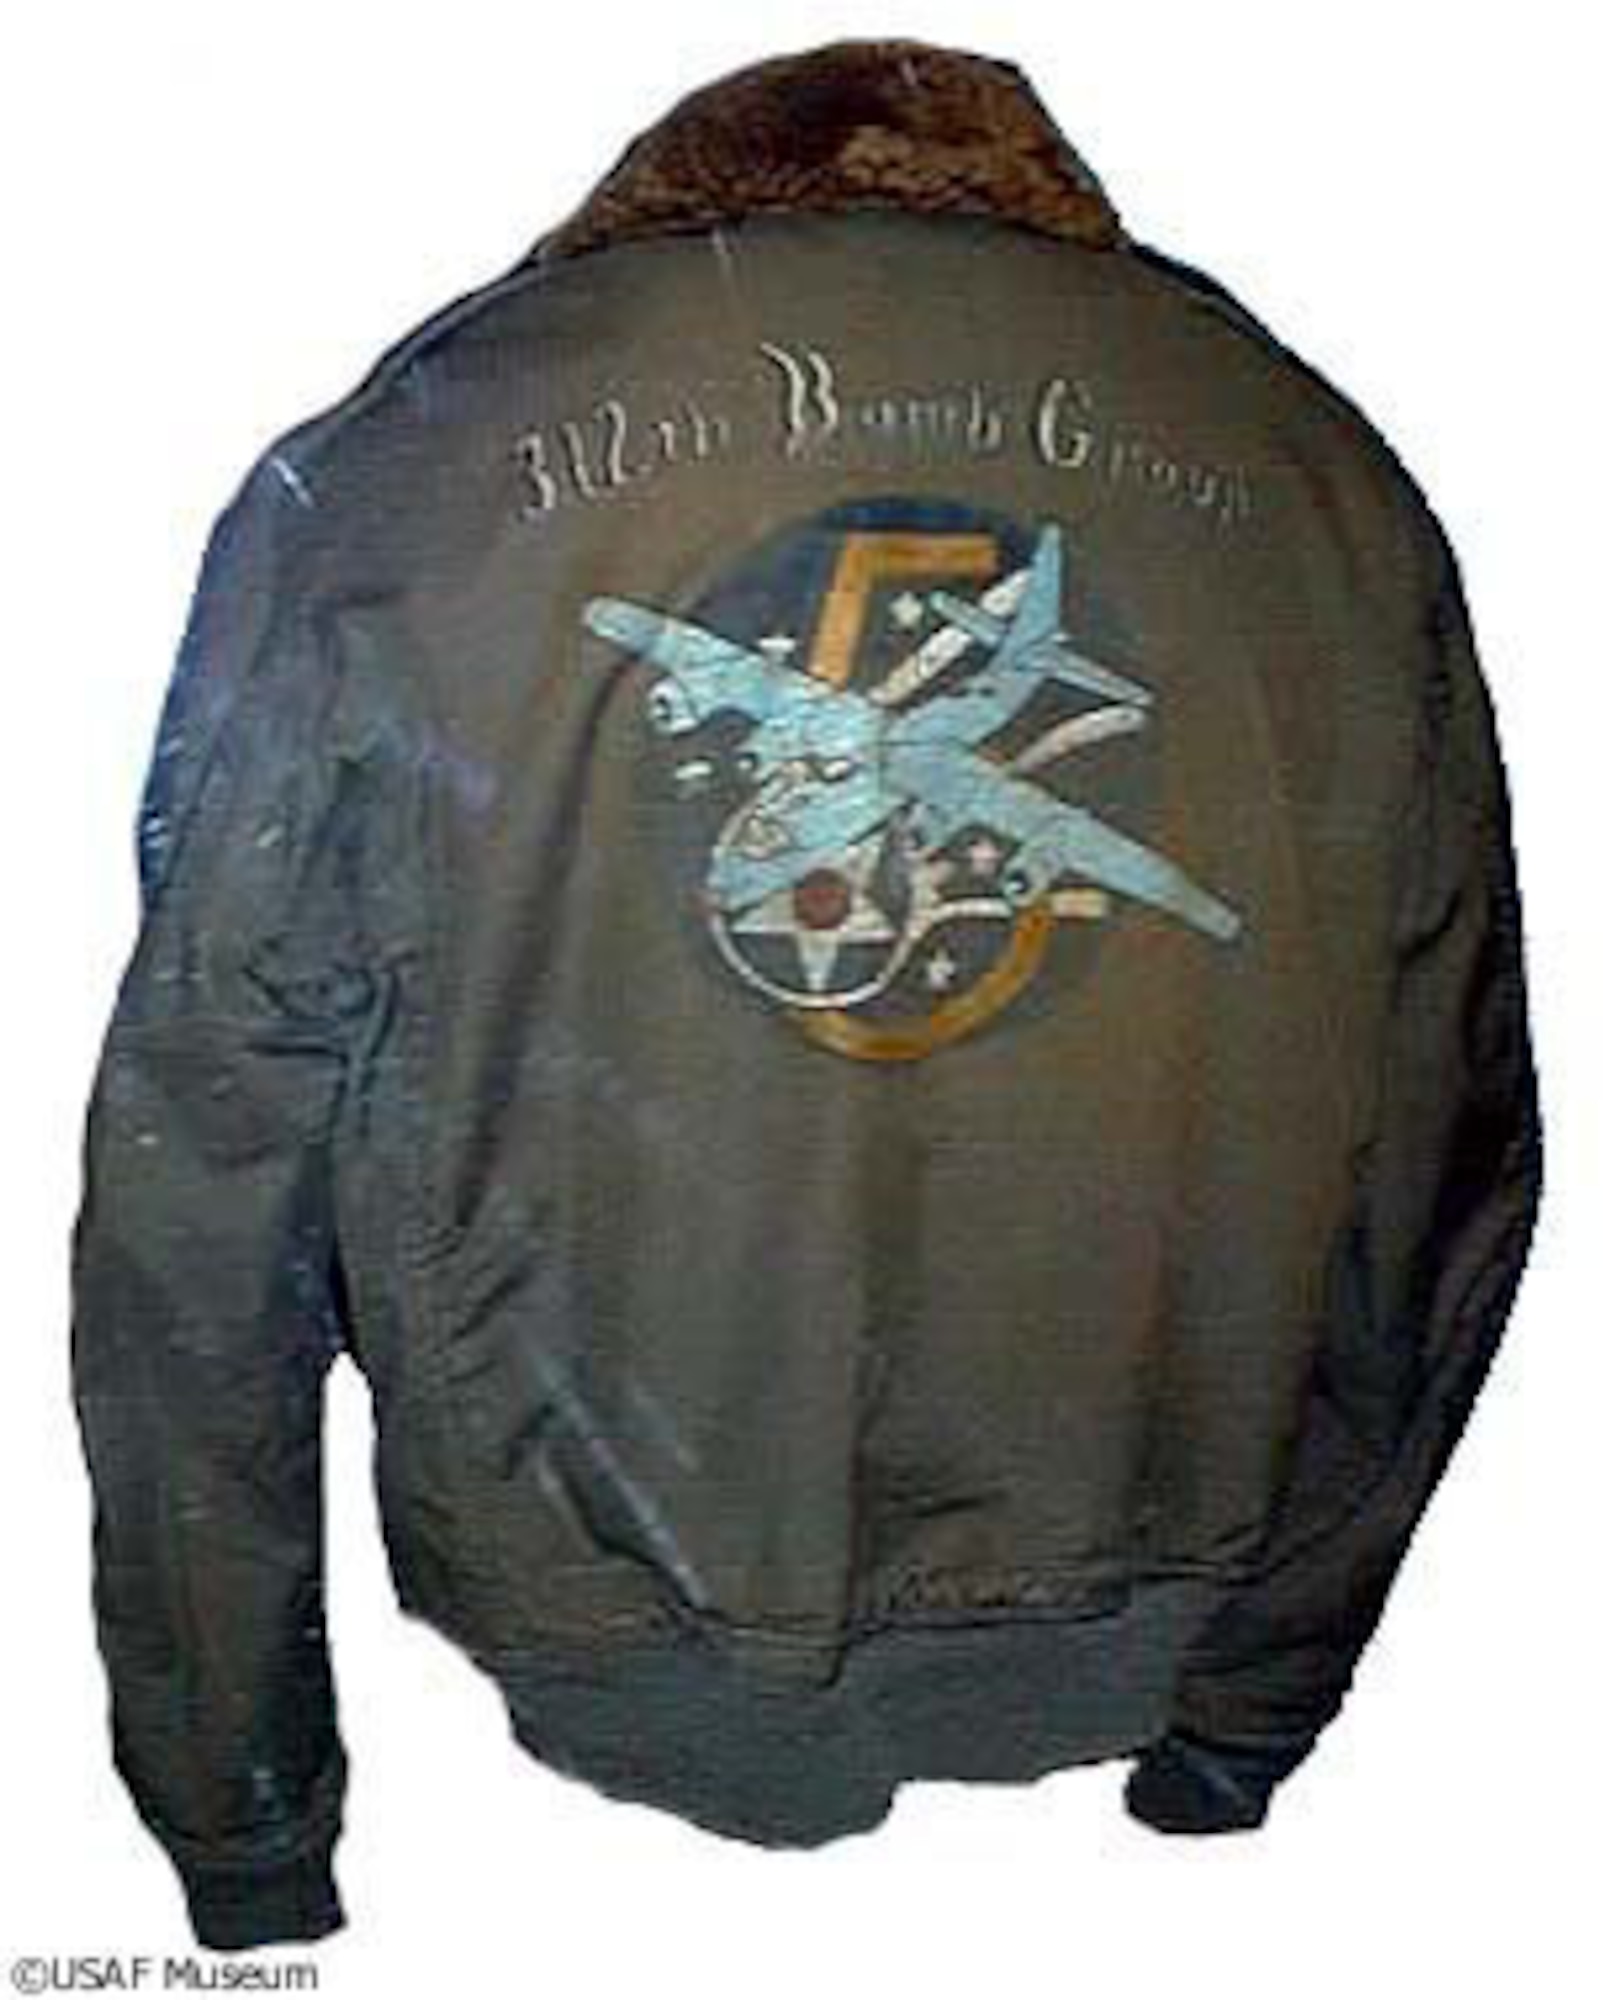 DAYTON, Ohio -- 312th Bomb Group aviator jacket on display at the National Museum of the United States Air Force. (U.S. Air Force photo)